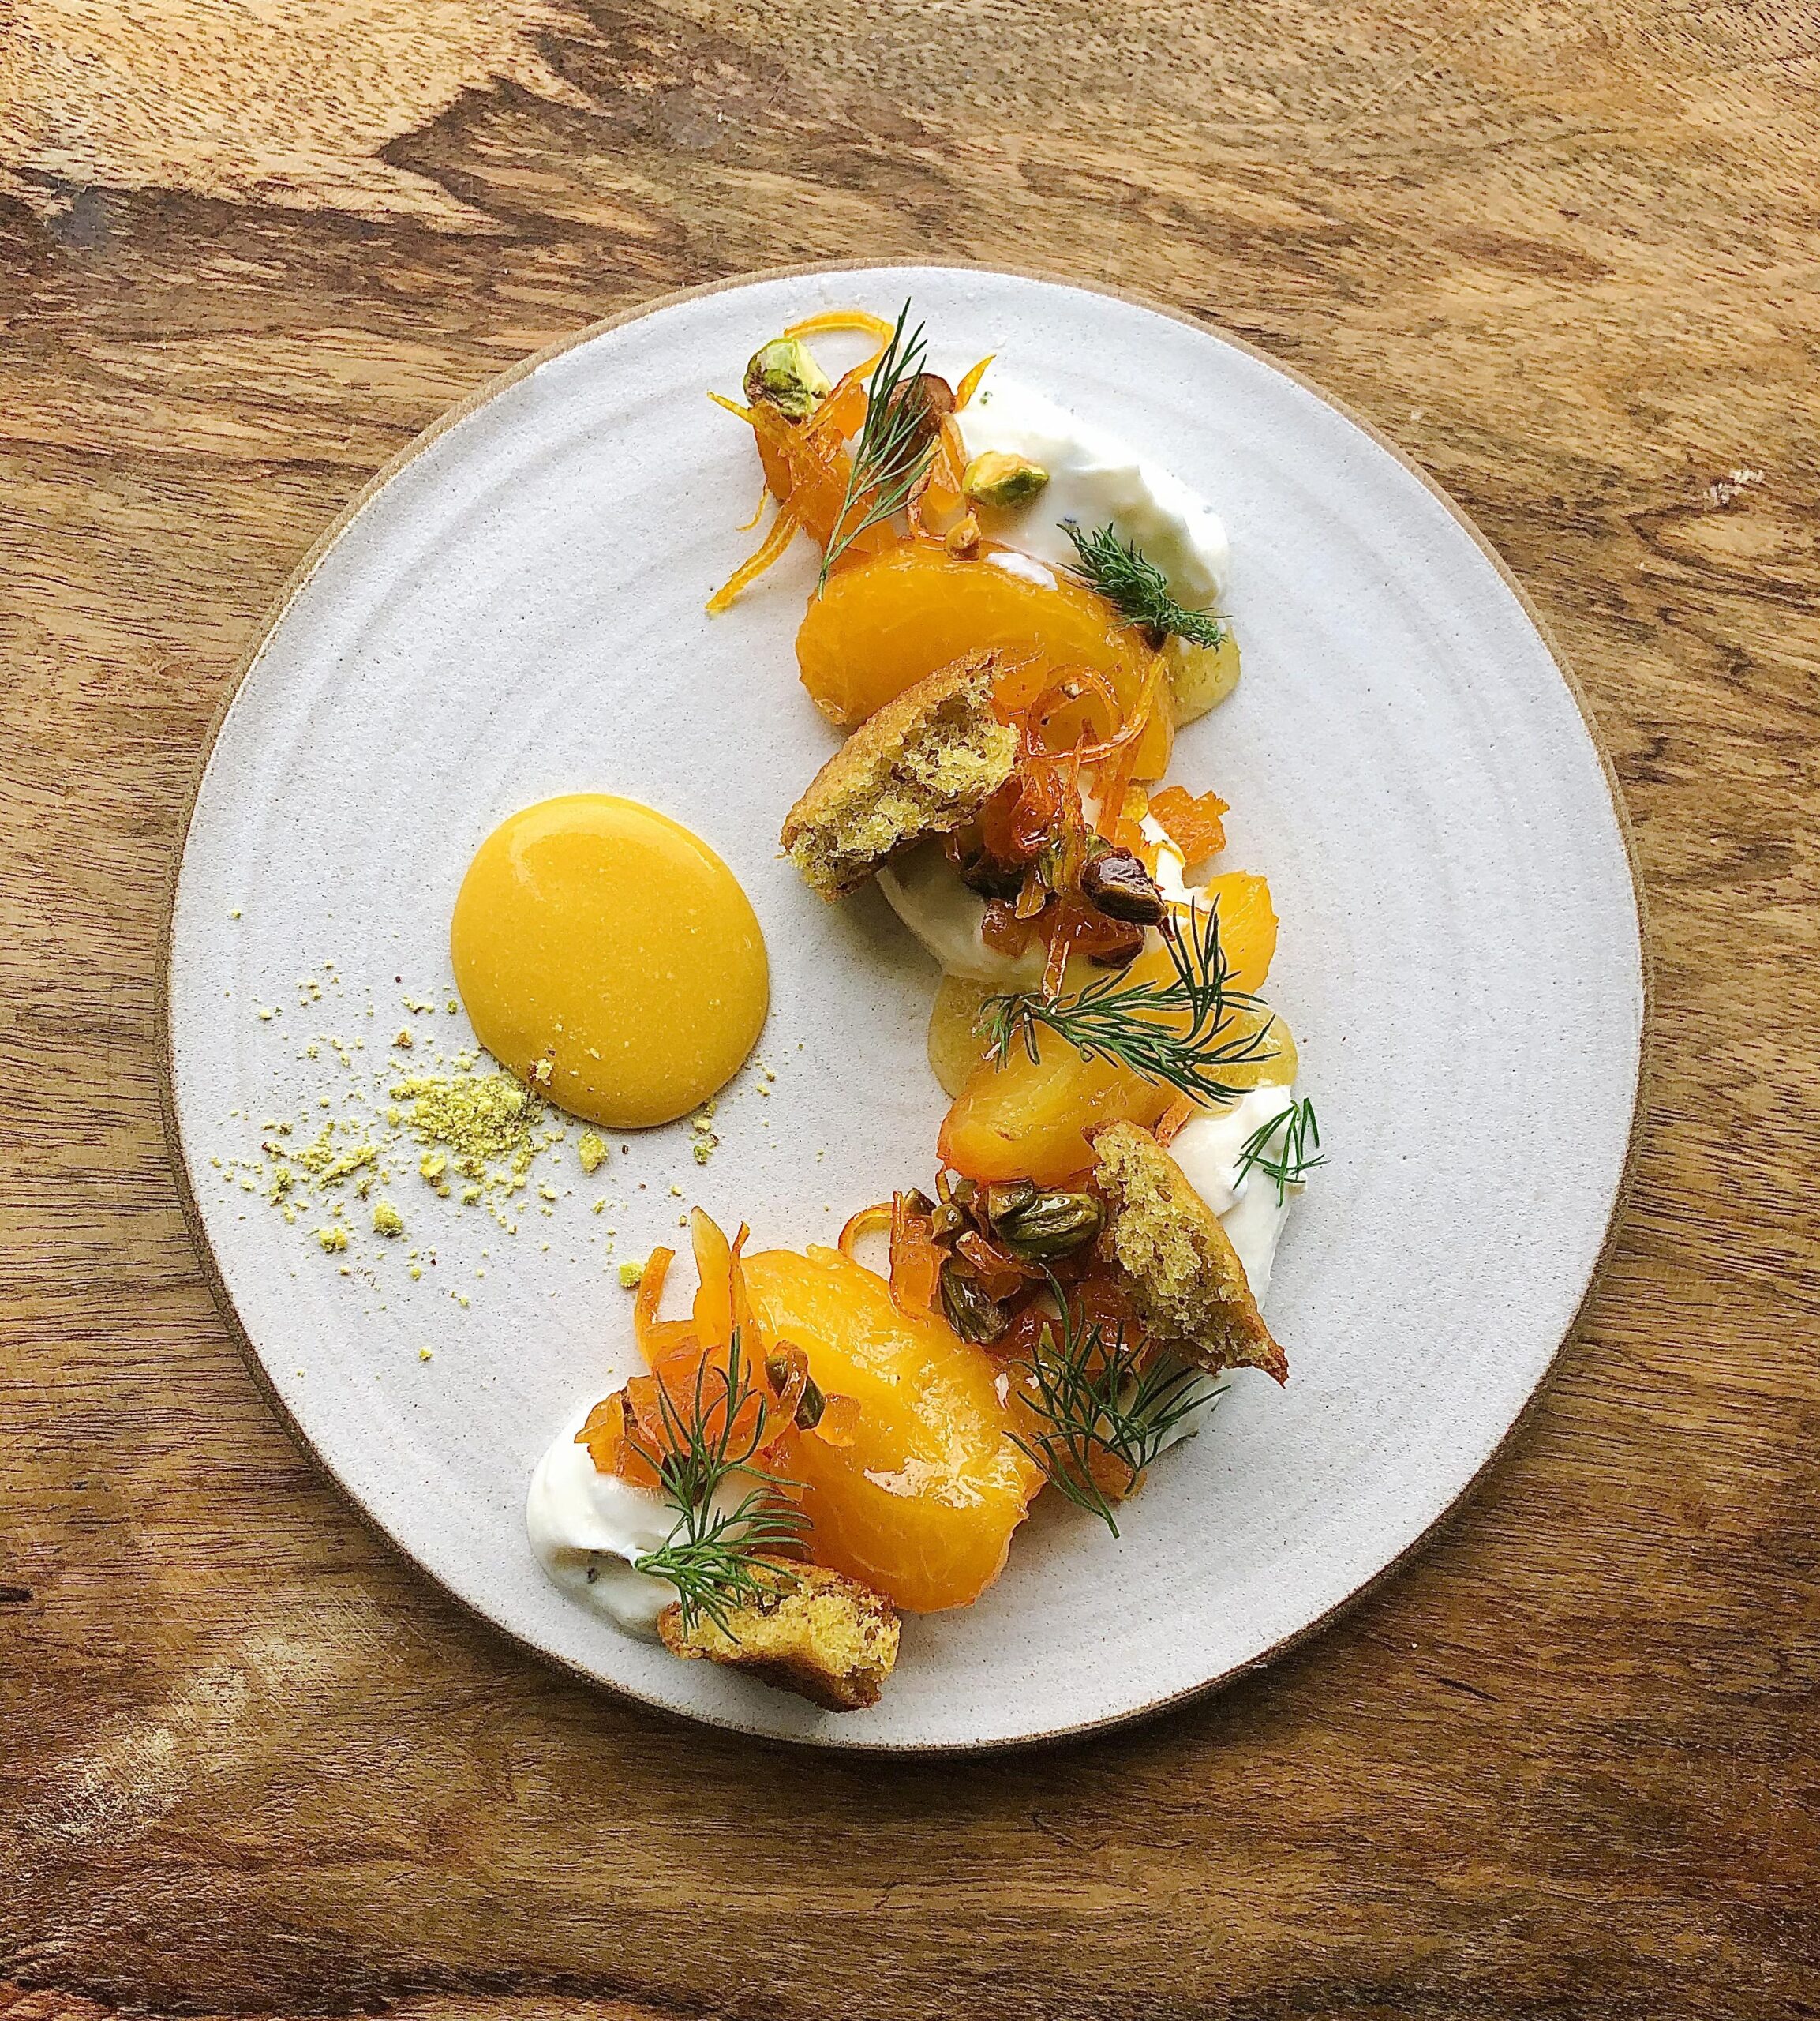  Fancy yet effortless: Apricots with Pistachio Praline